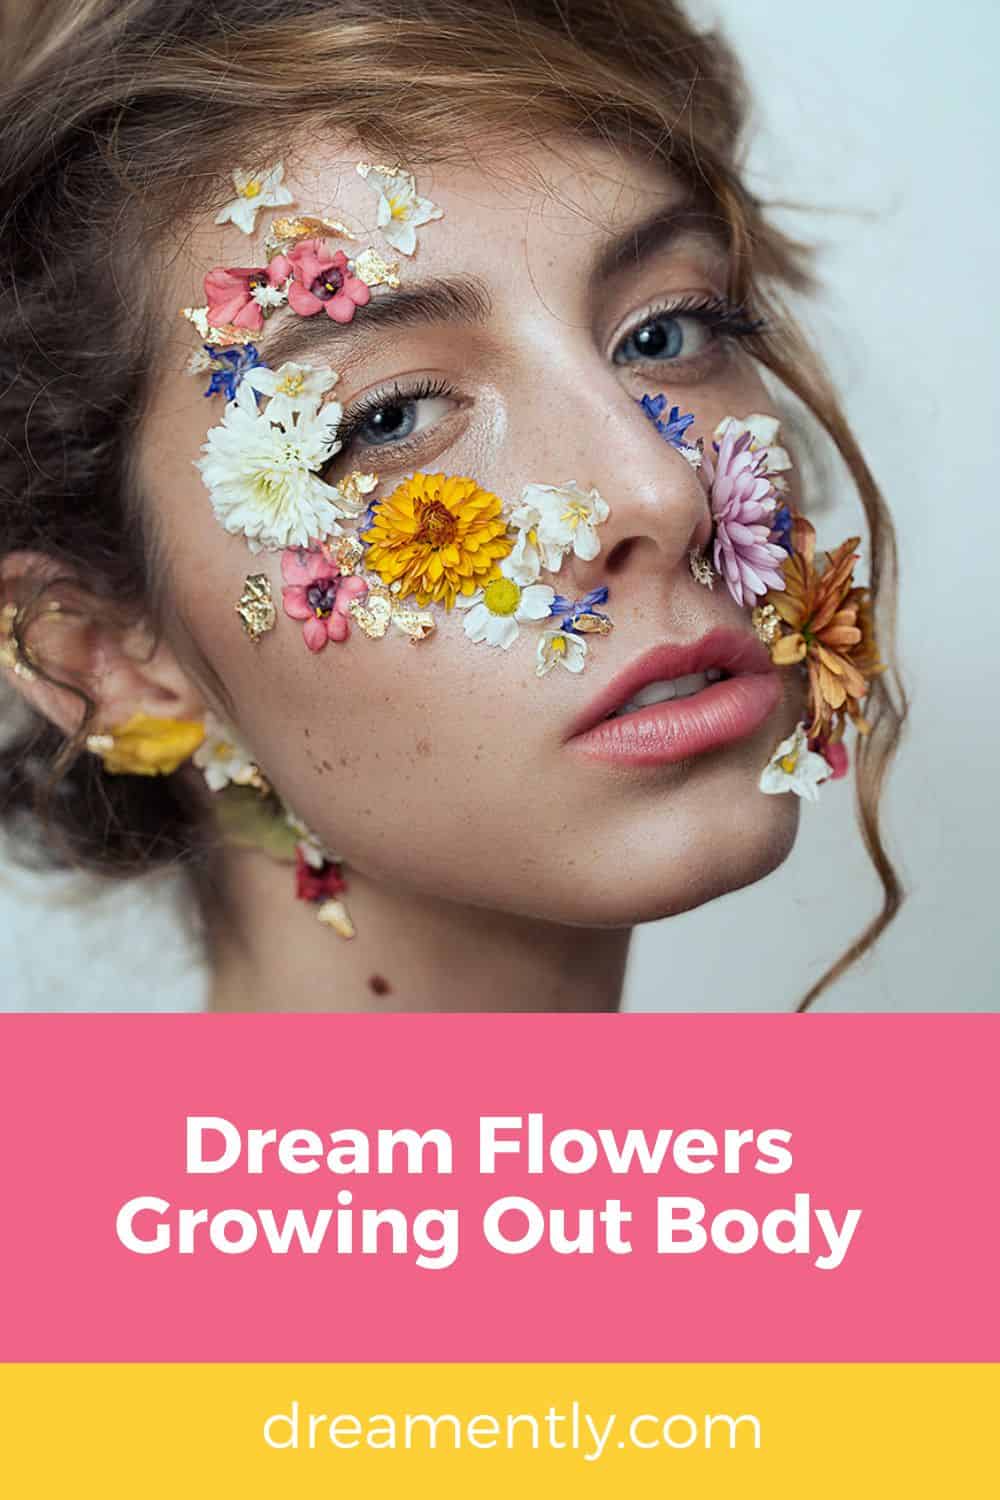 Dream Flowers Growing Out Body